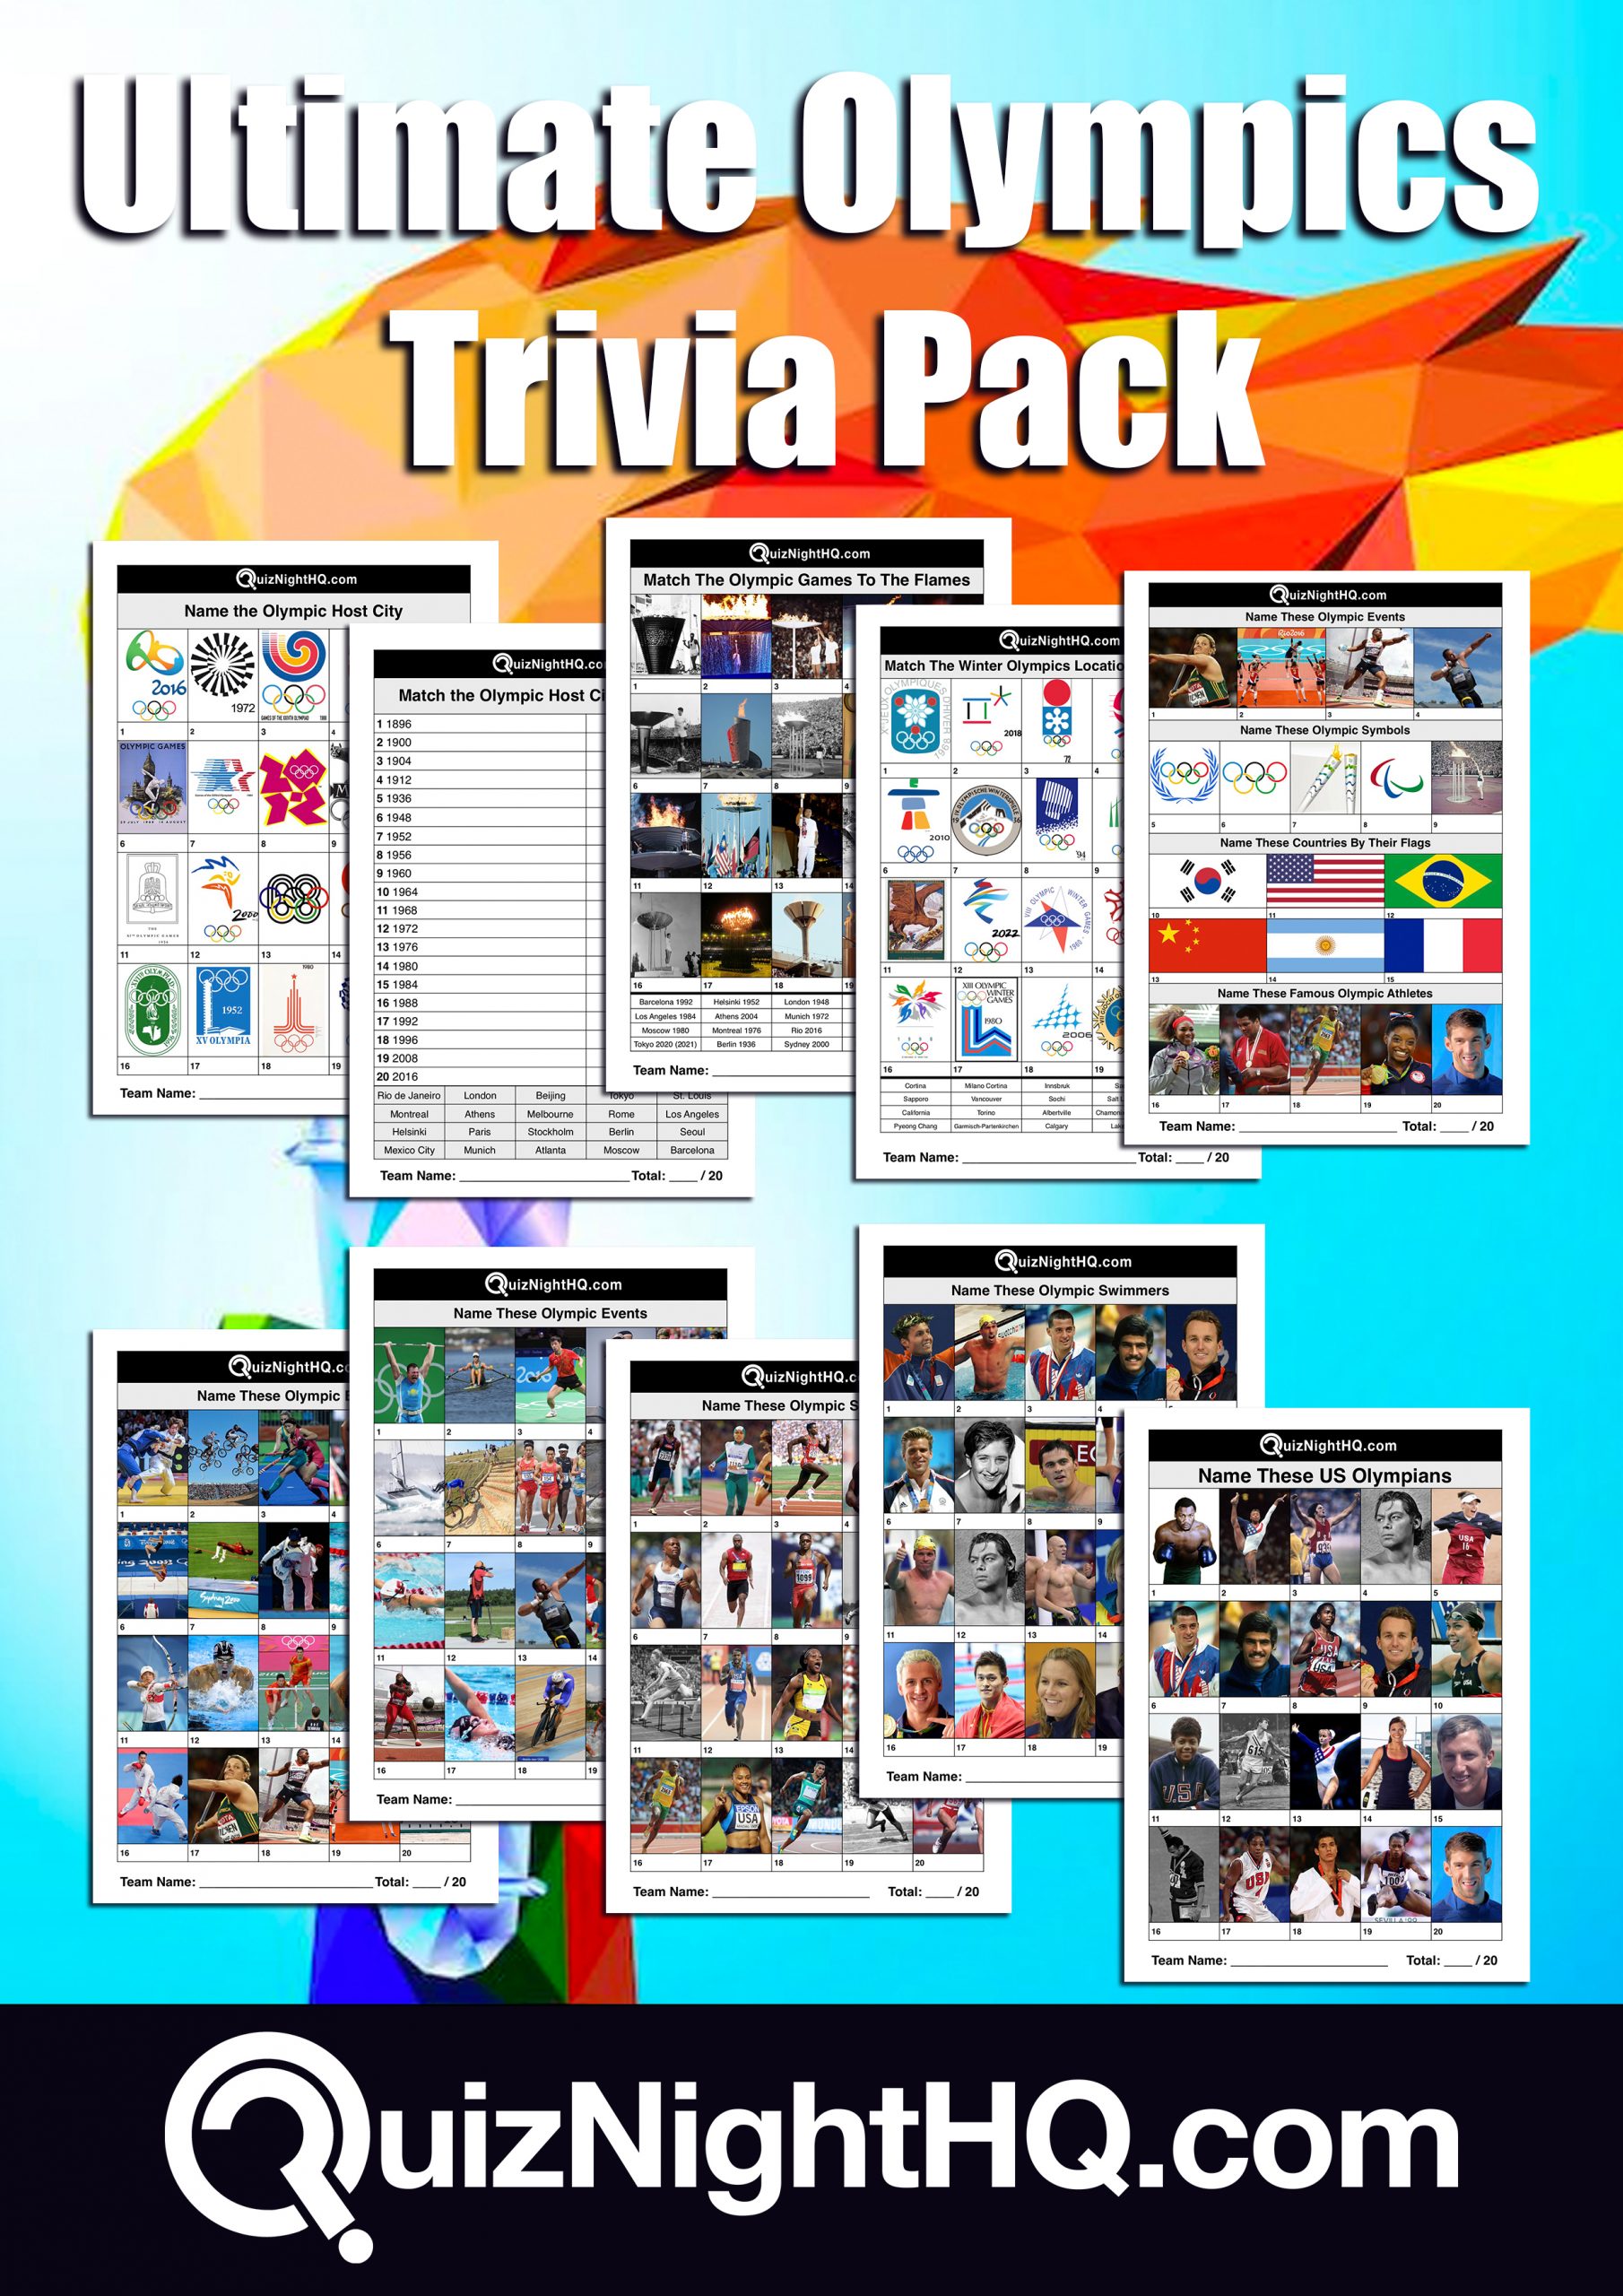 The Ultimate Olympics Trivia Pack Quiznighthq